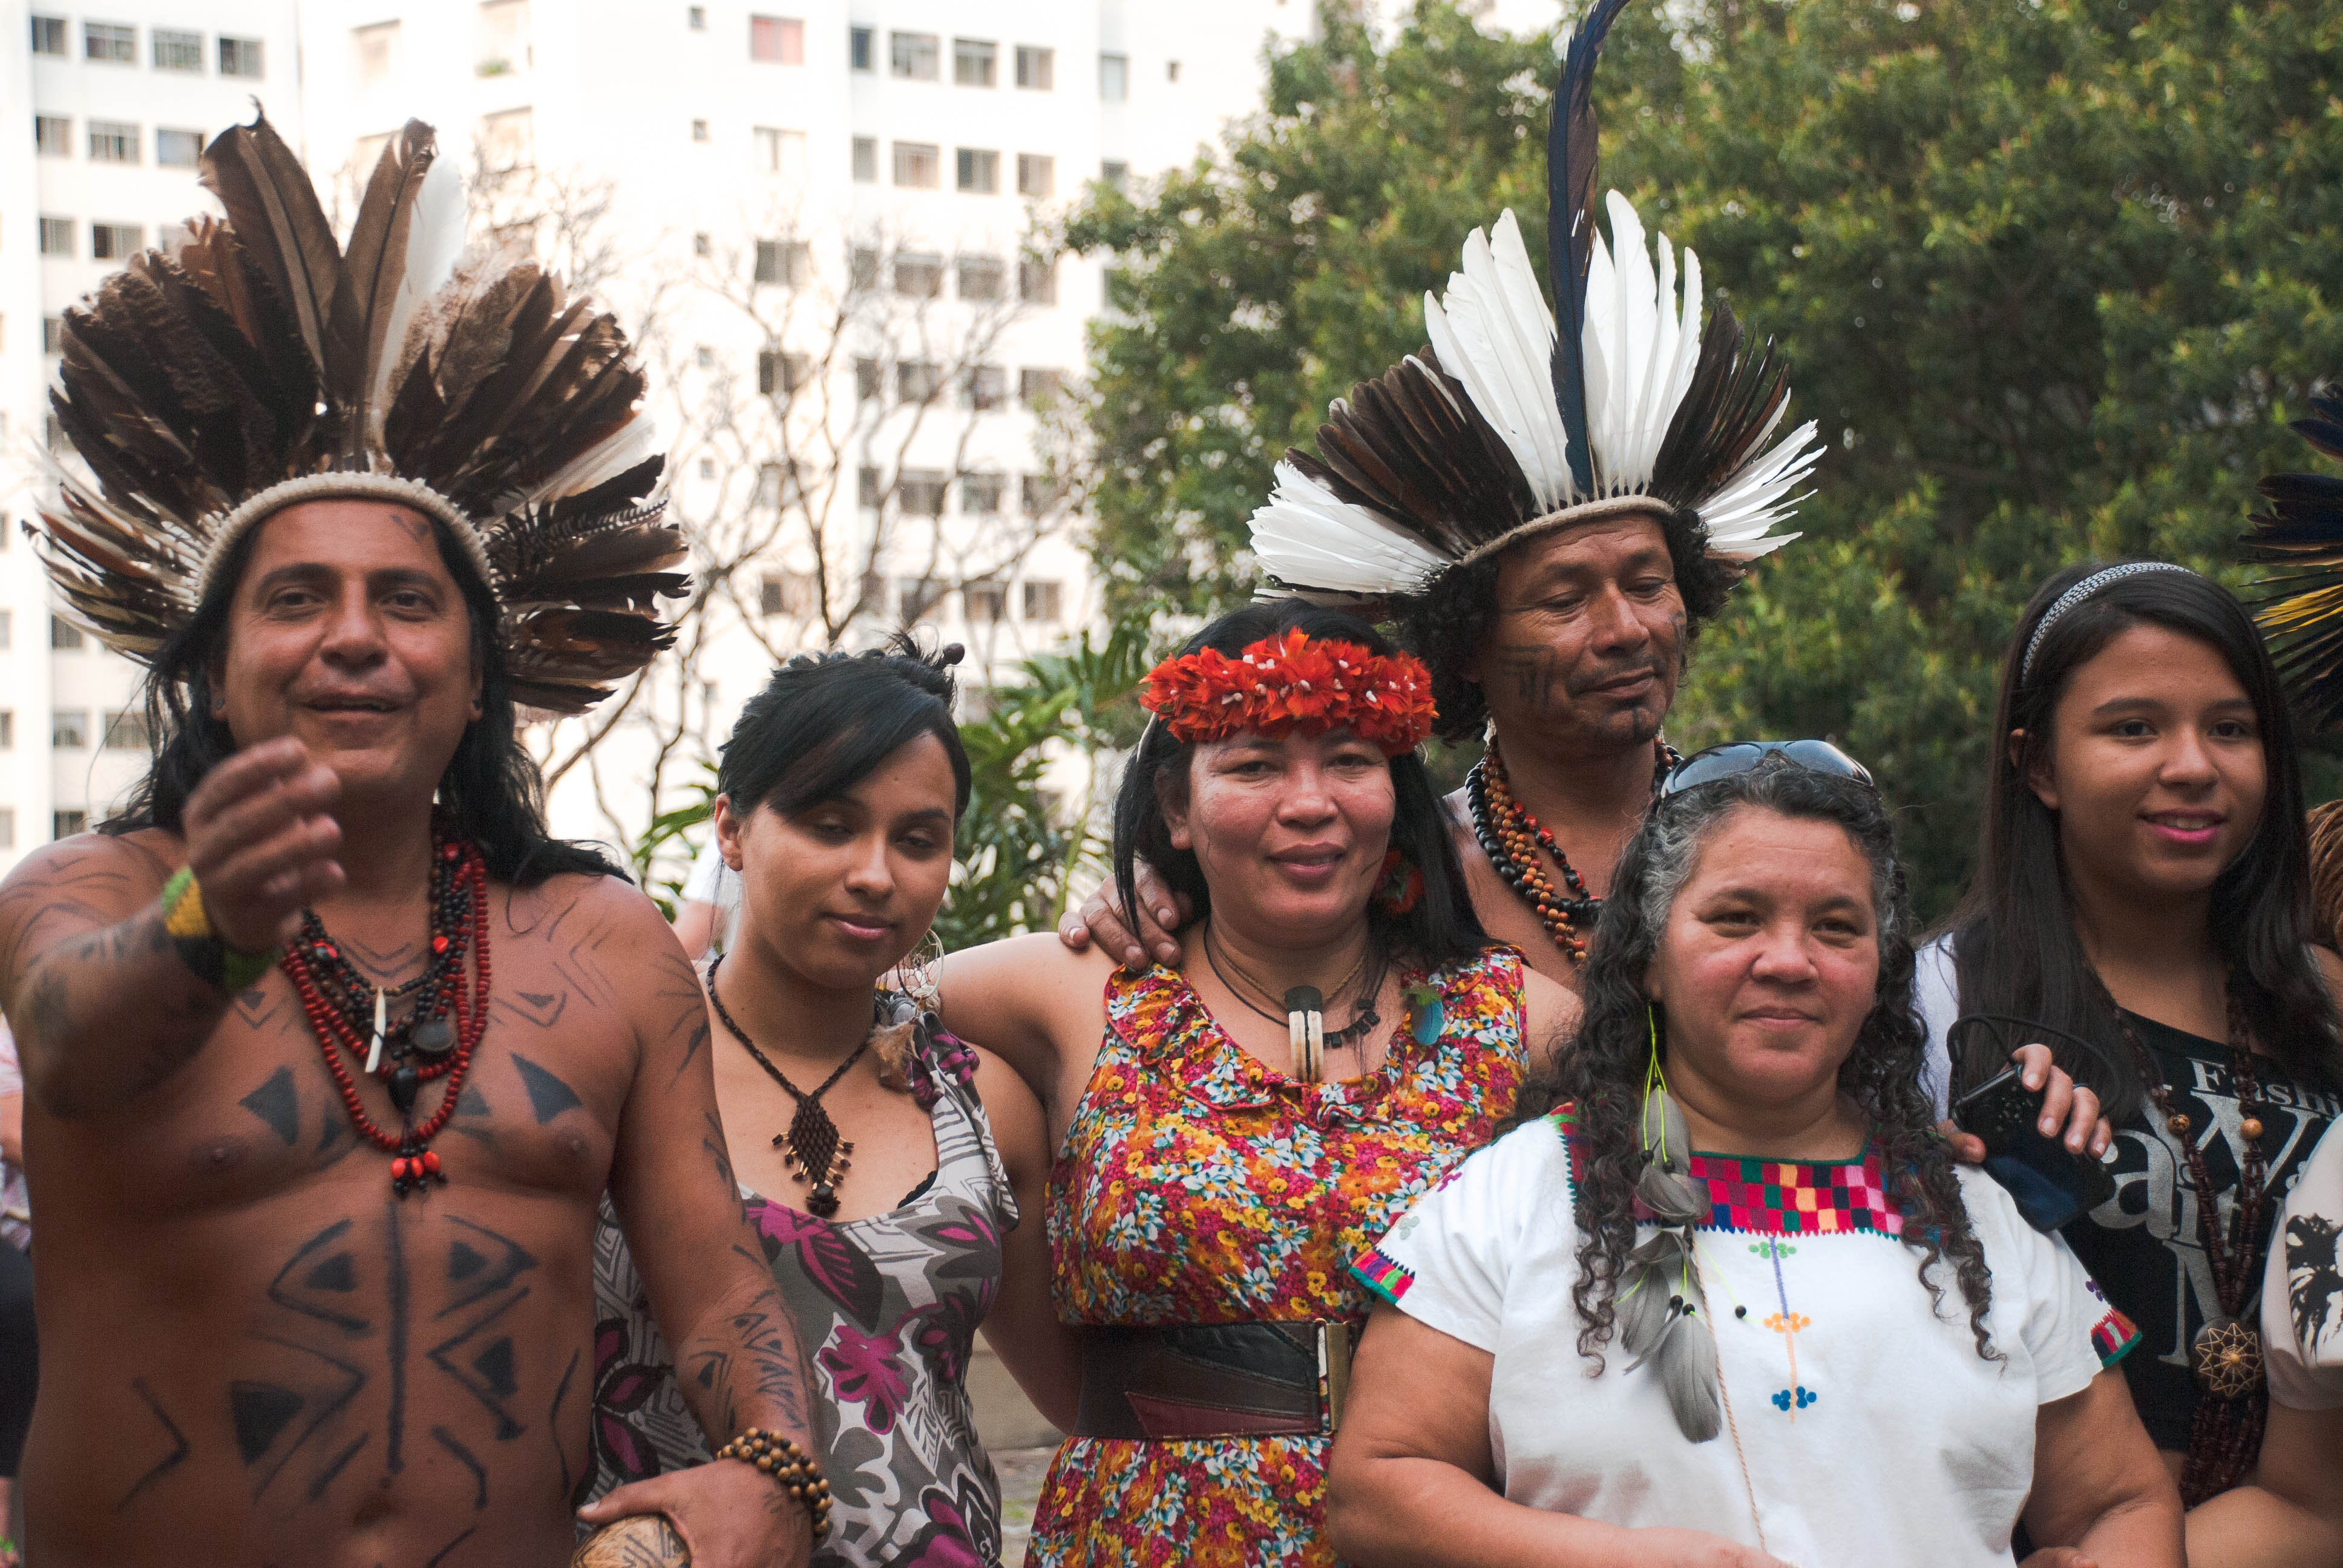 Brazil’s indigenous population can use their land, but are not its owners